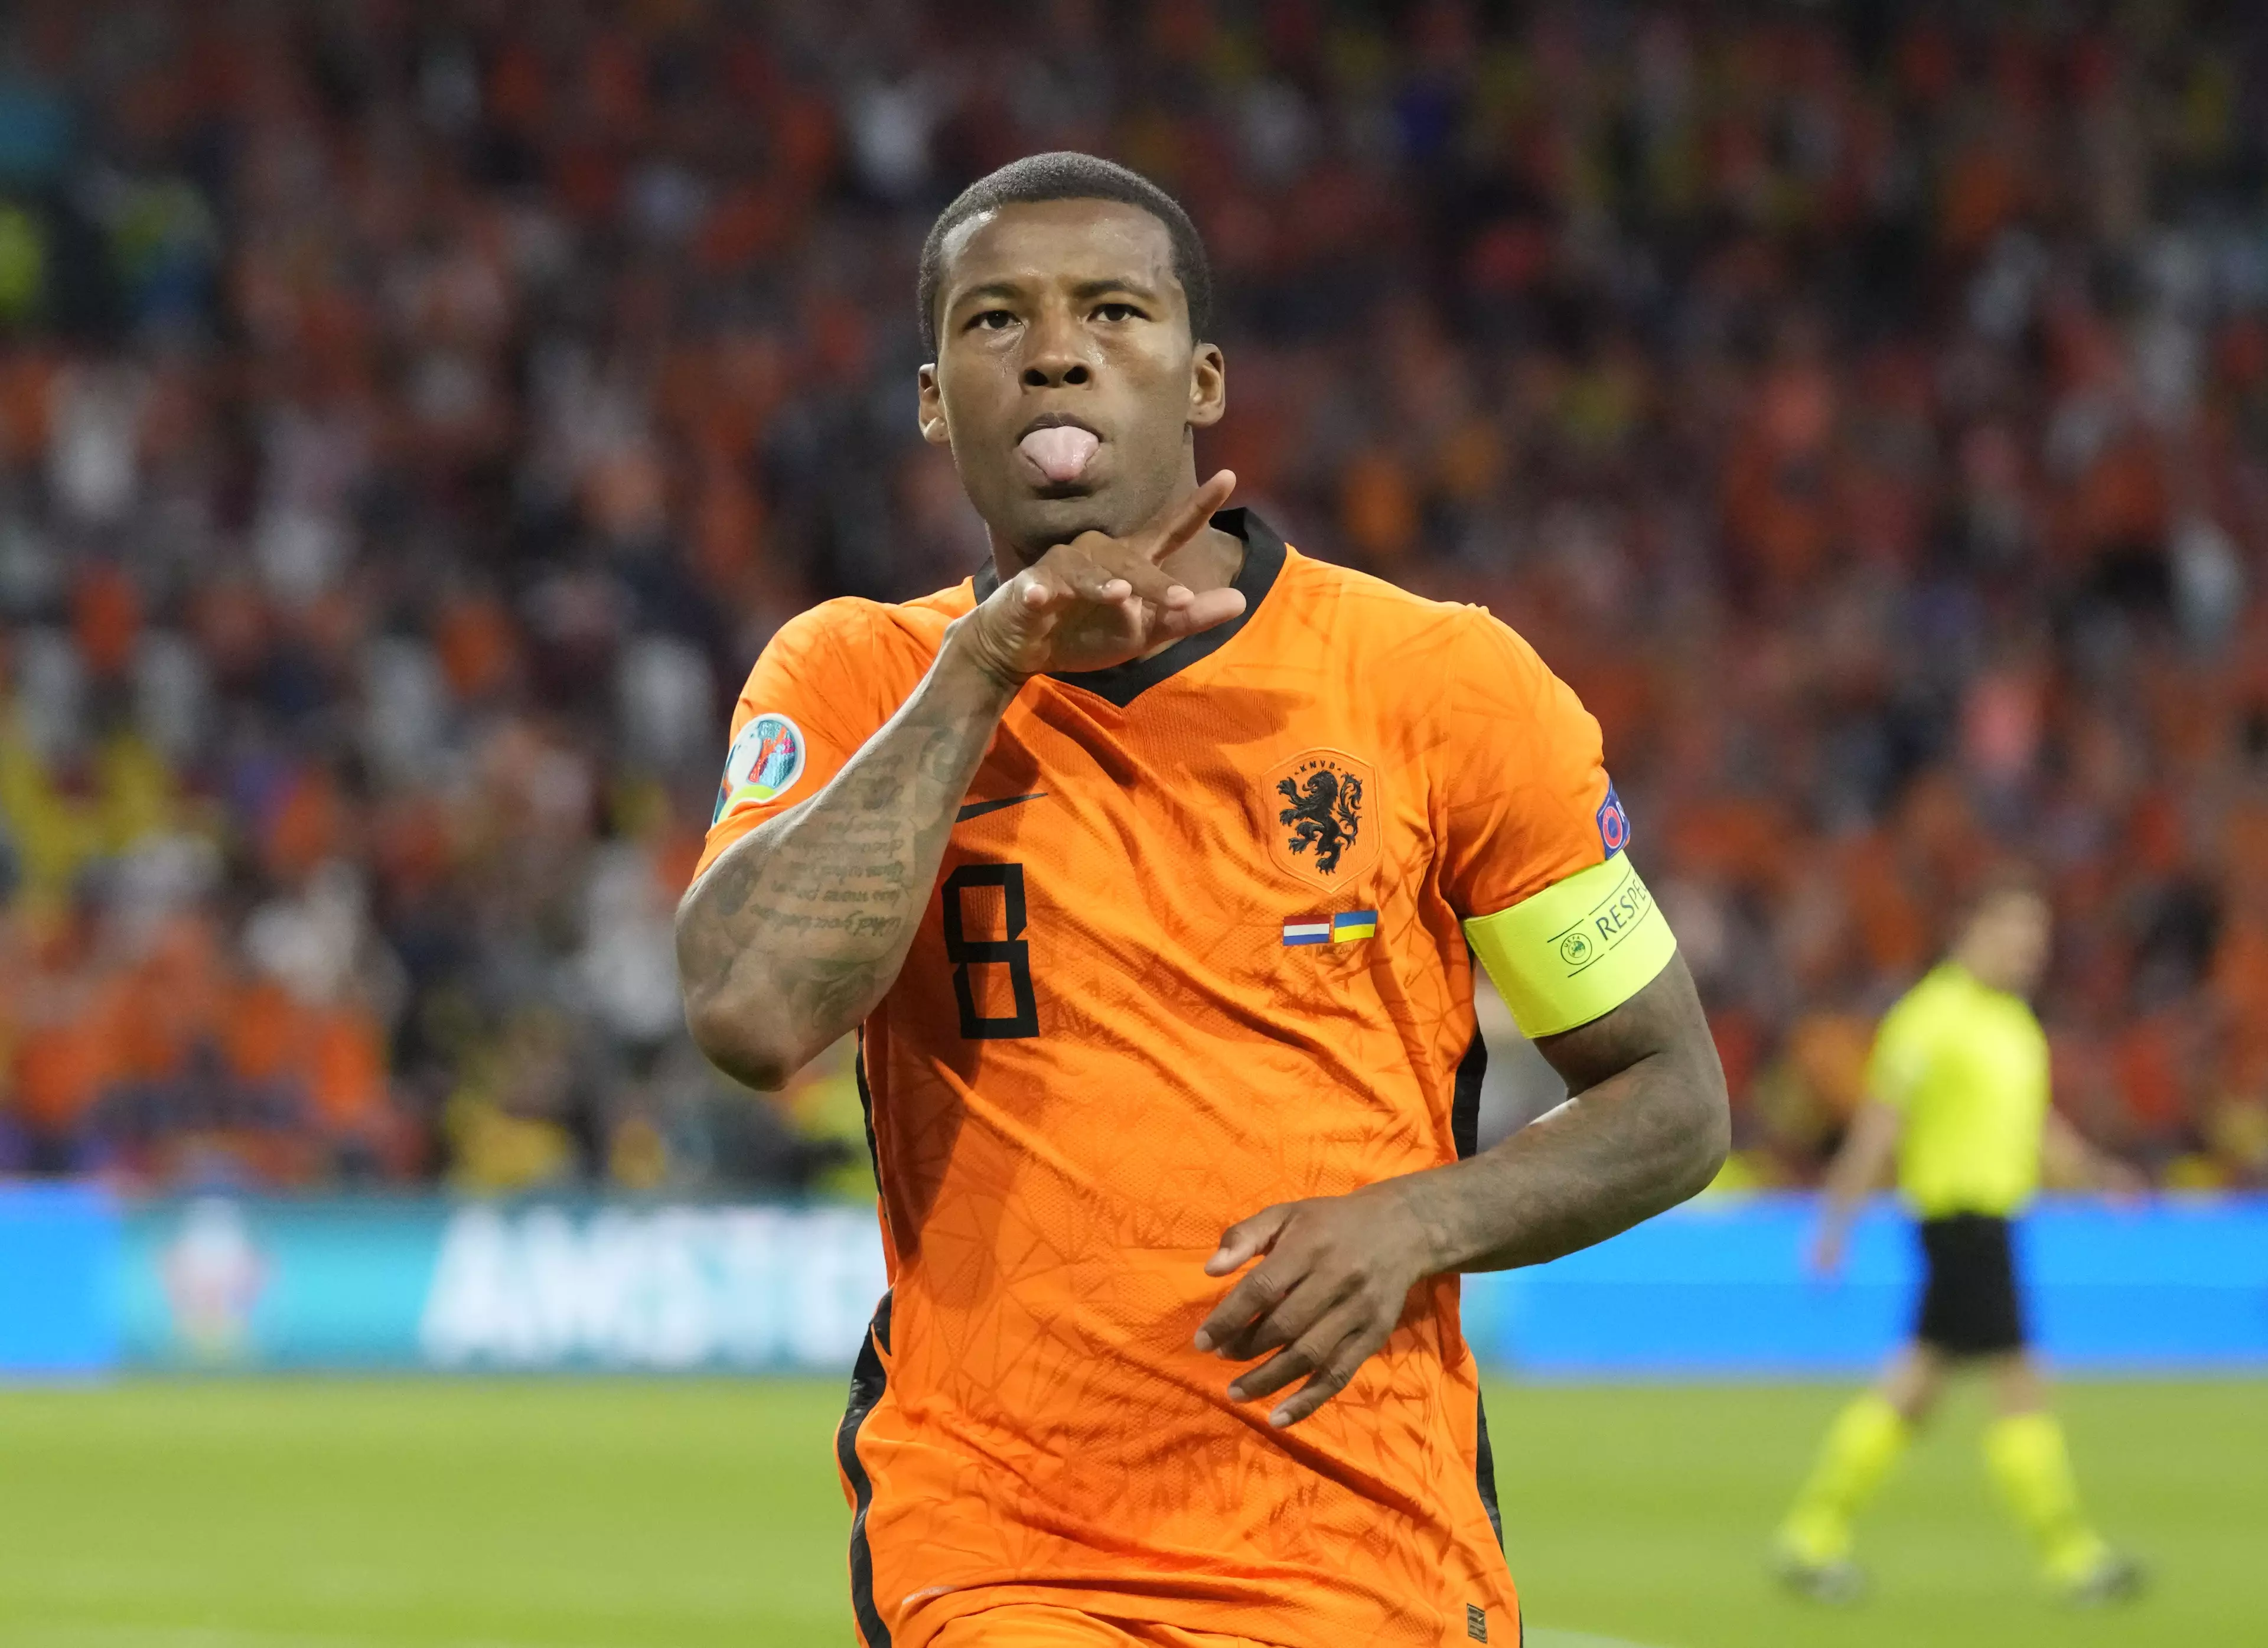 Wijnaldum was expected to move to Barcelona. Image: PA Images